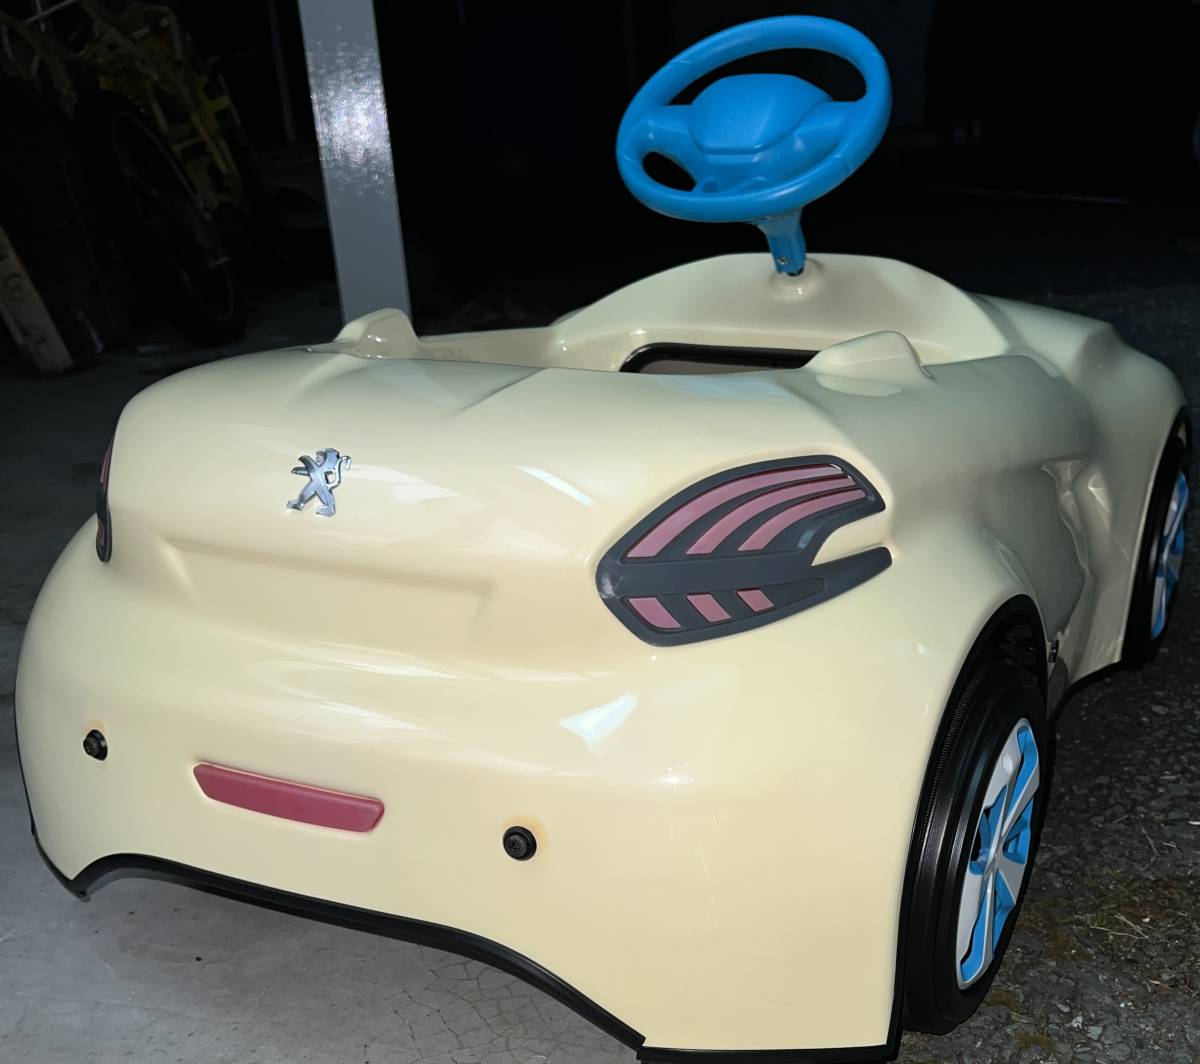  Manufacturers unknown Peugeot Peugeot manner? for children pedal car secondhand goods 